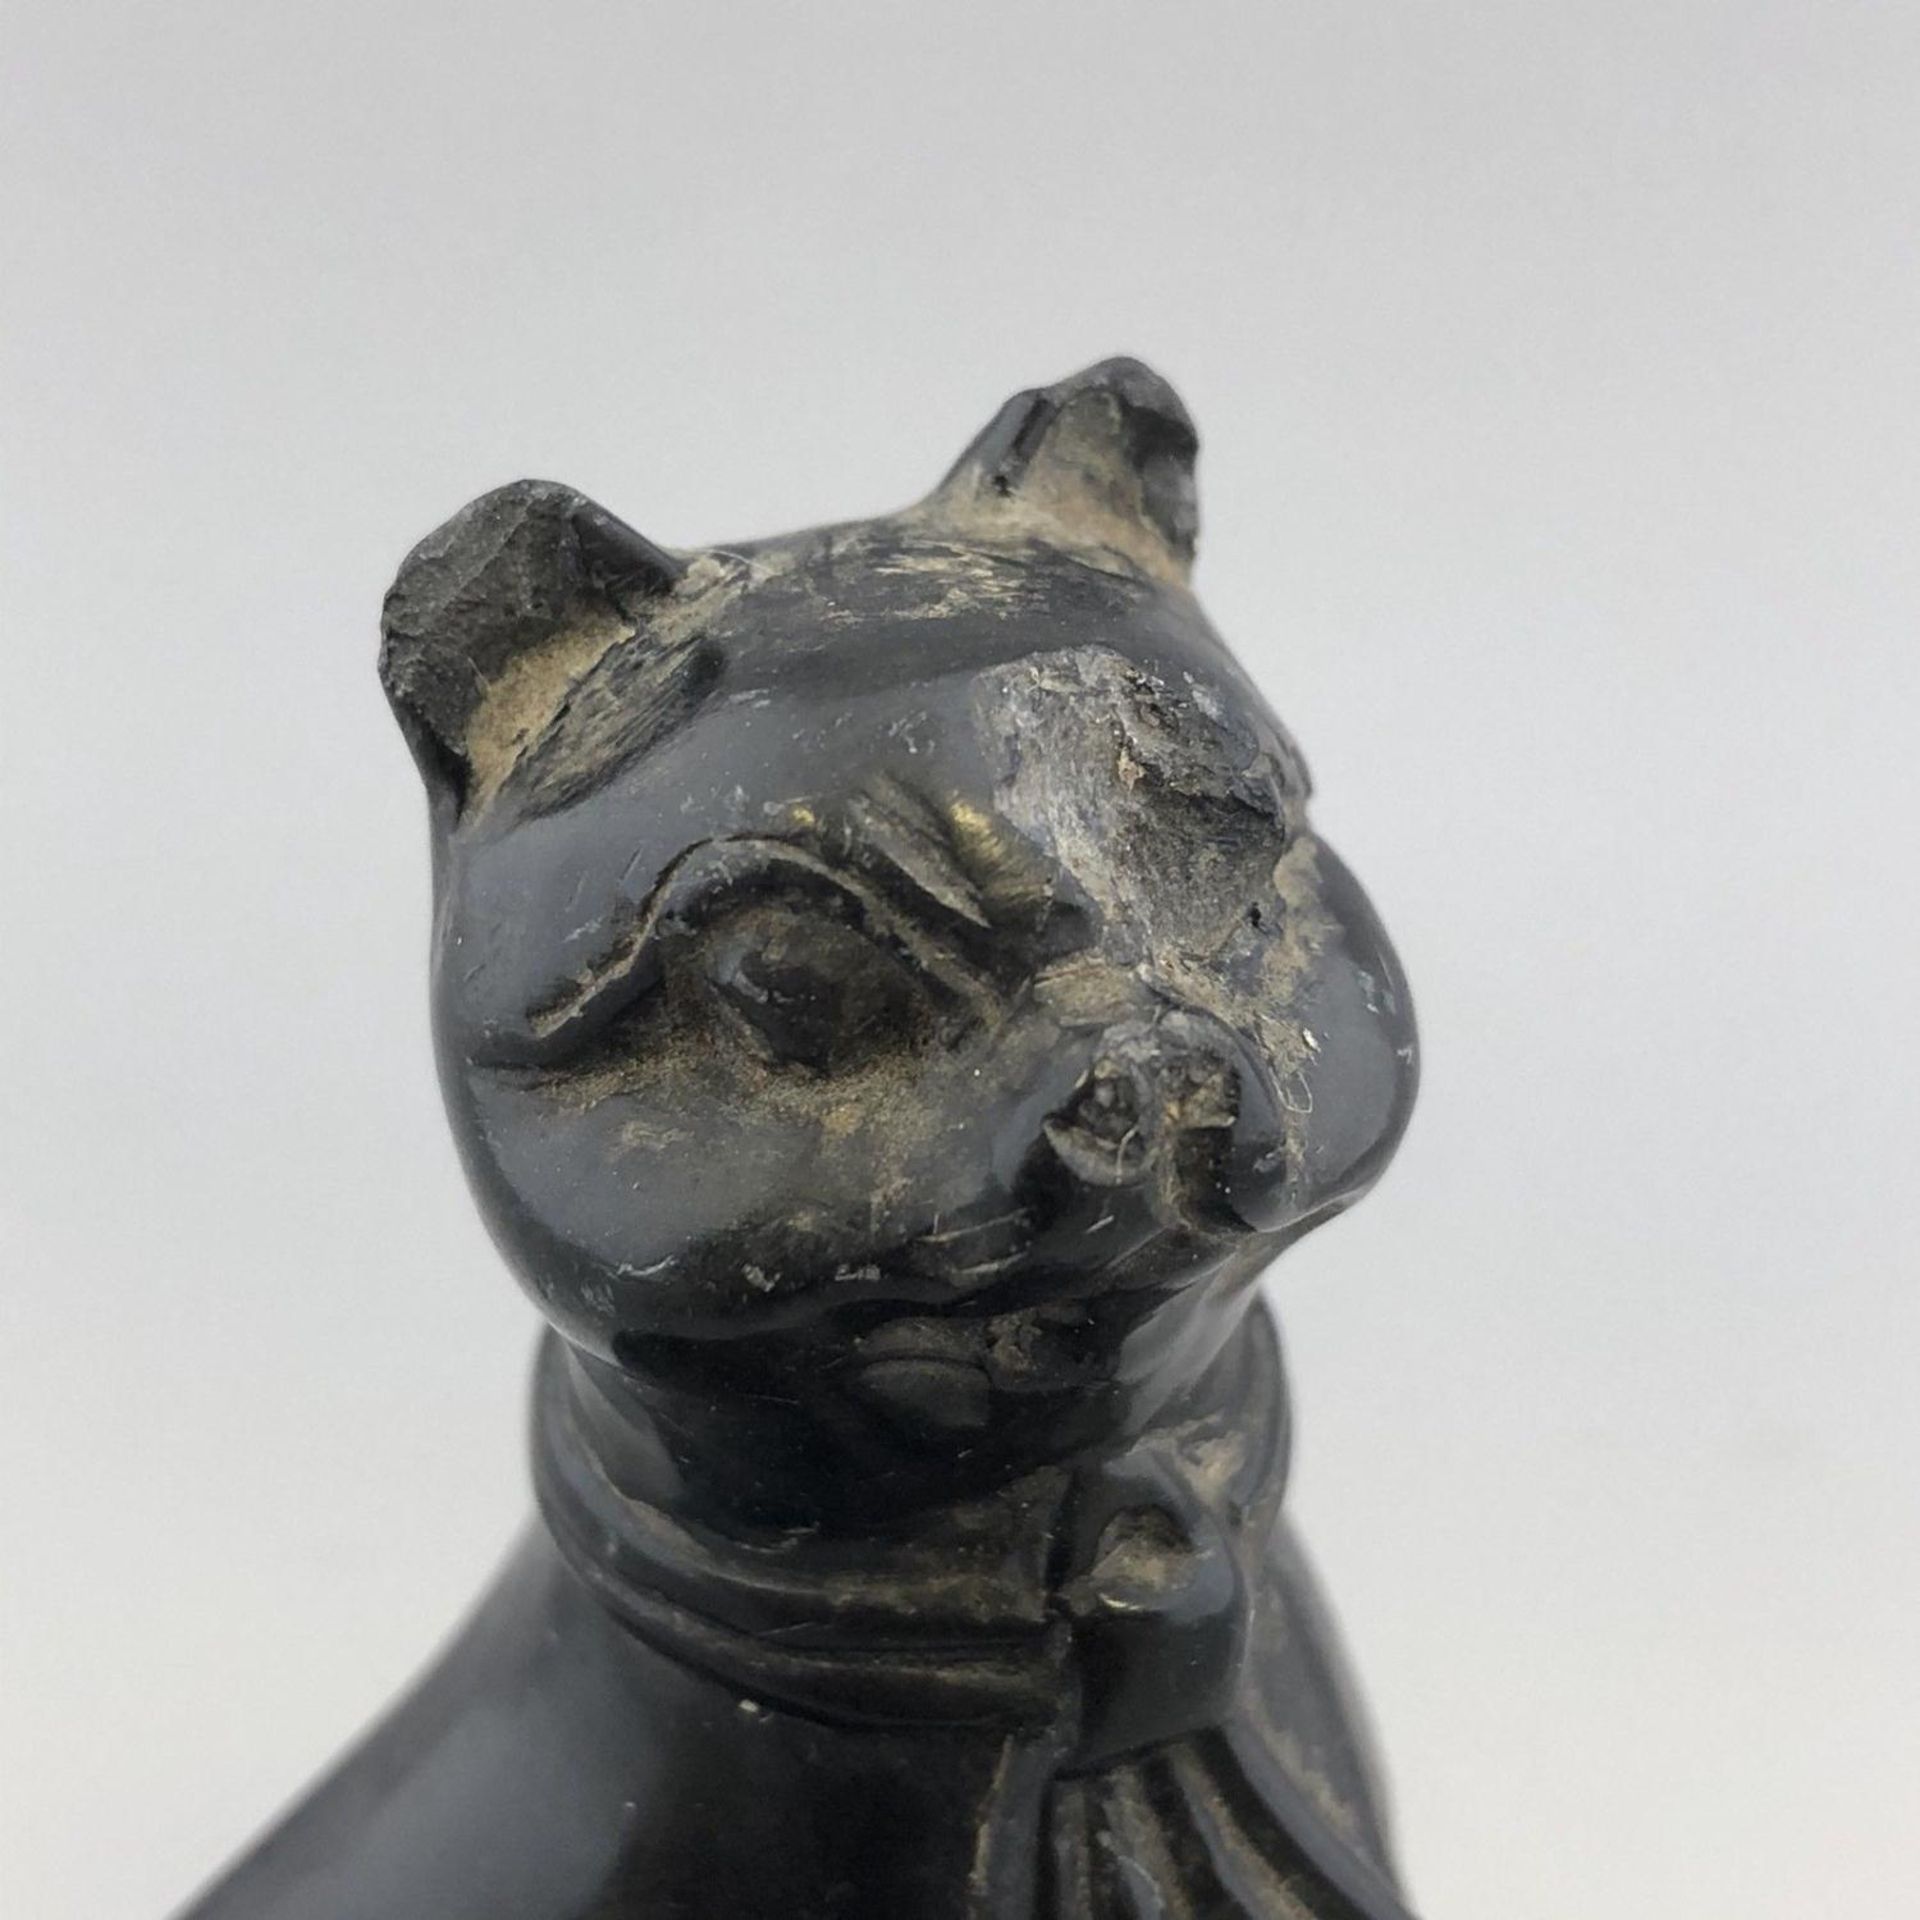 Interesting Antique carved hardstone stone figure of a lucky black cat - Japan? - Image 4 of 7